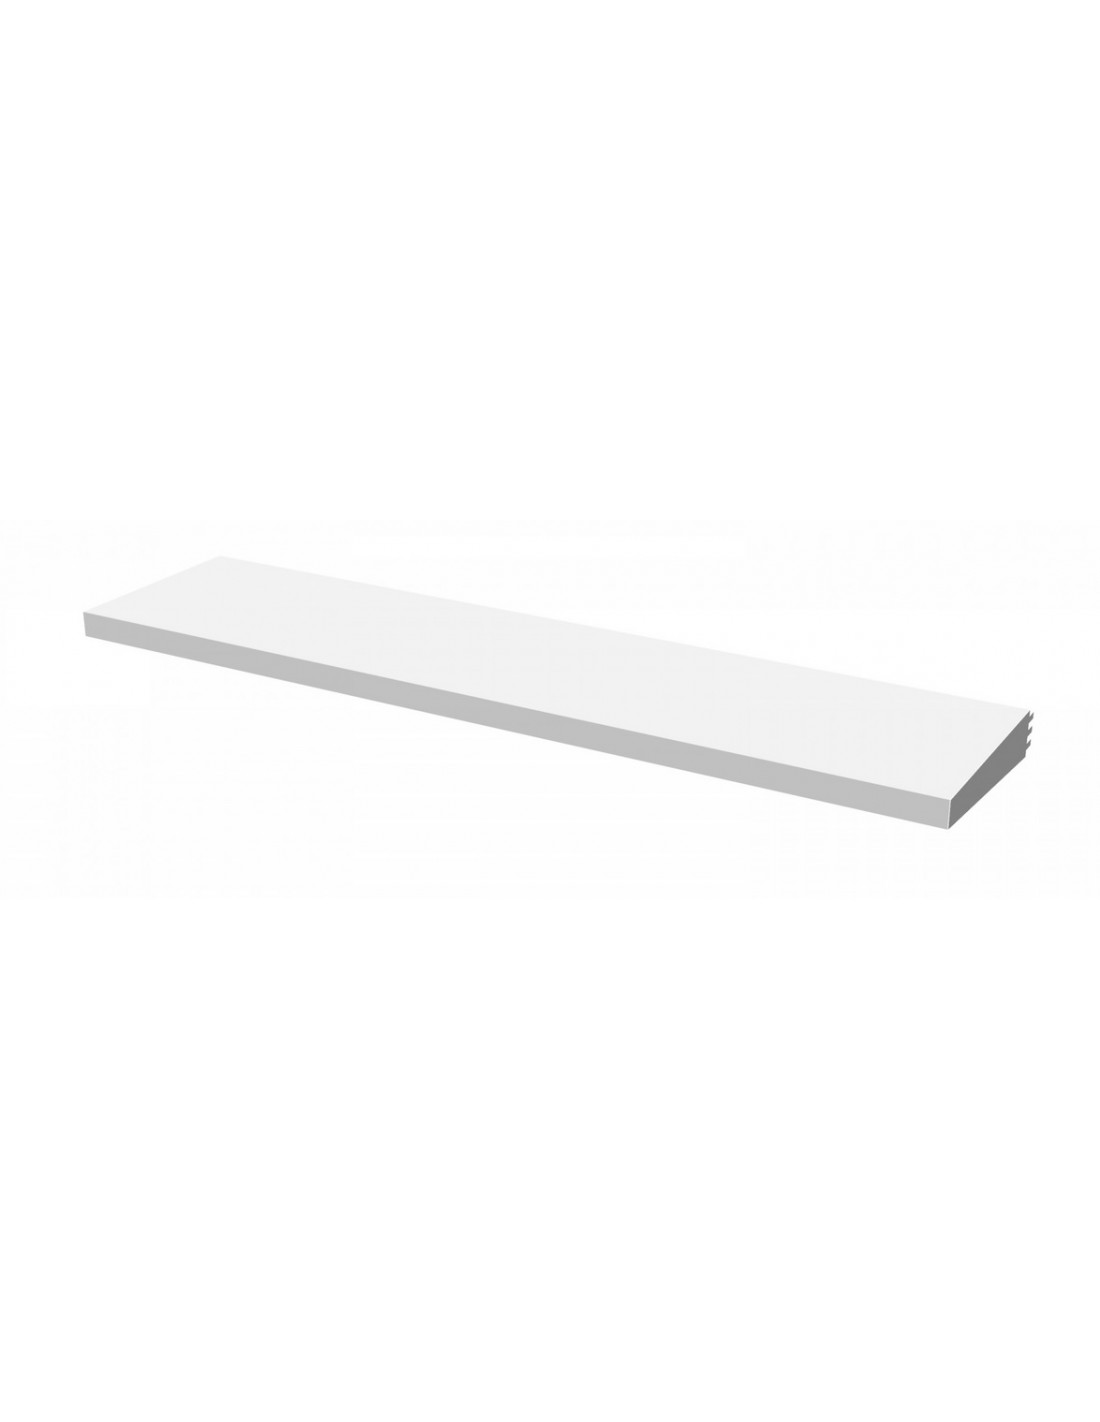 Additional shelf in 187.5 cm white painted sheet - For mod. VOLCANO 80